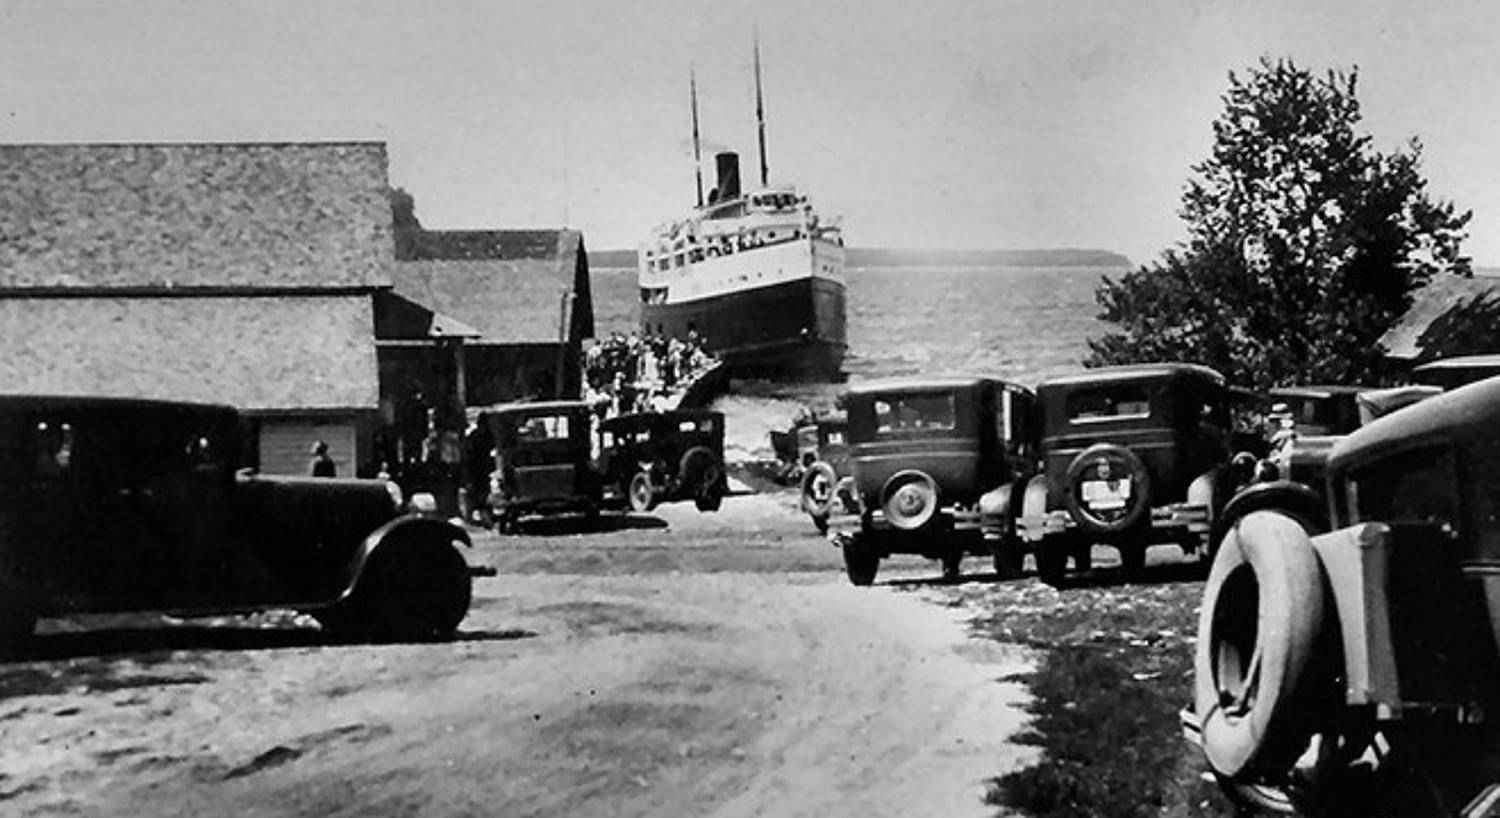 A black and white historic photograph of a large ship coming in to dock at a small town with antique cars